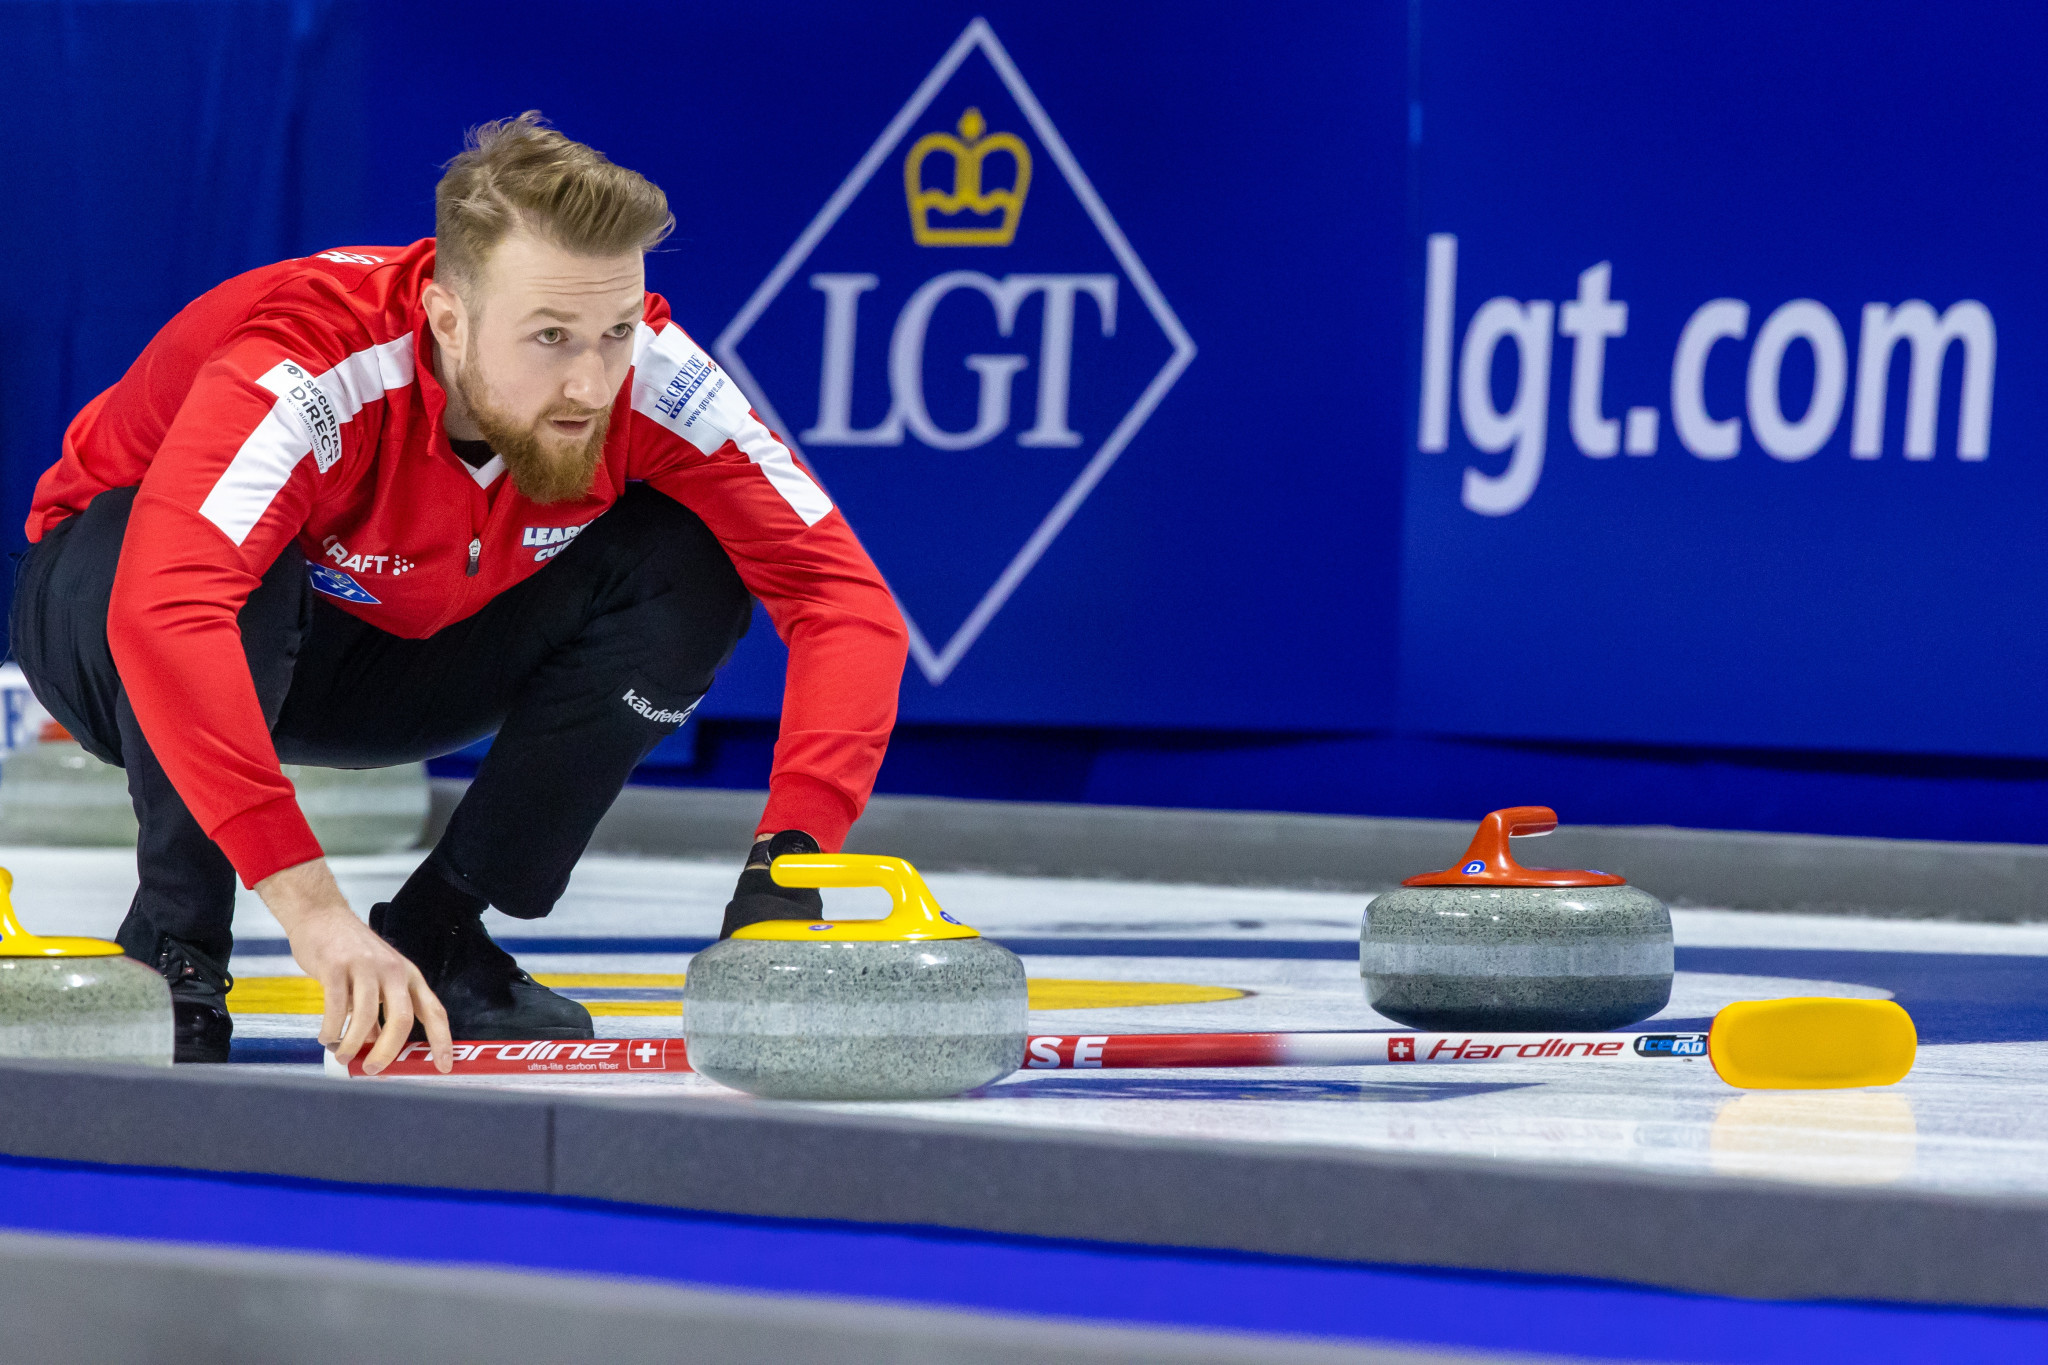 Yannick Schwaller will skip Switzerland in the knockout stage after The Netherlands beat South Korea to ensure their playoff place ©WCF/Steve Seixeiro